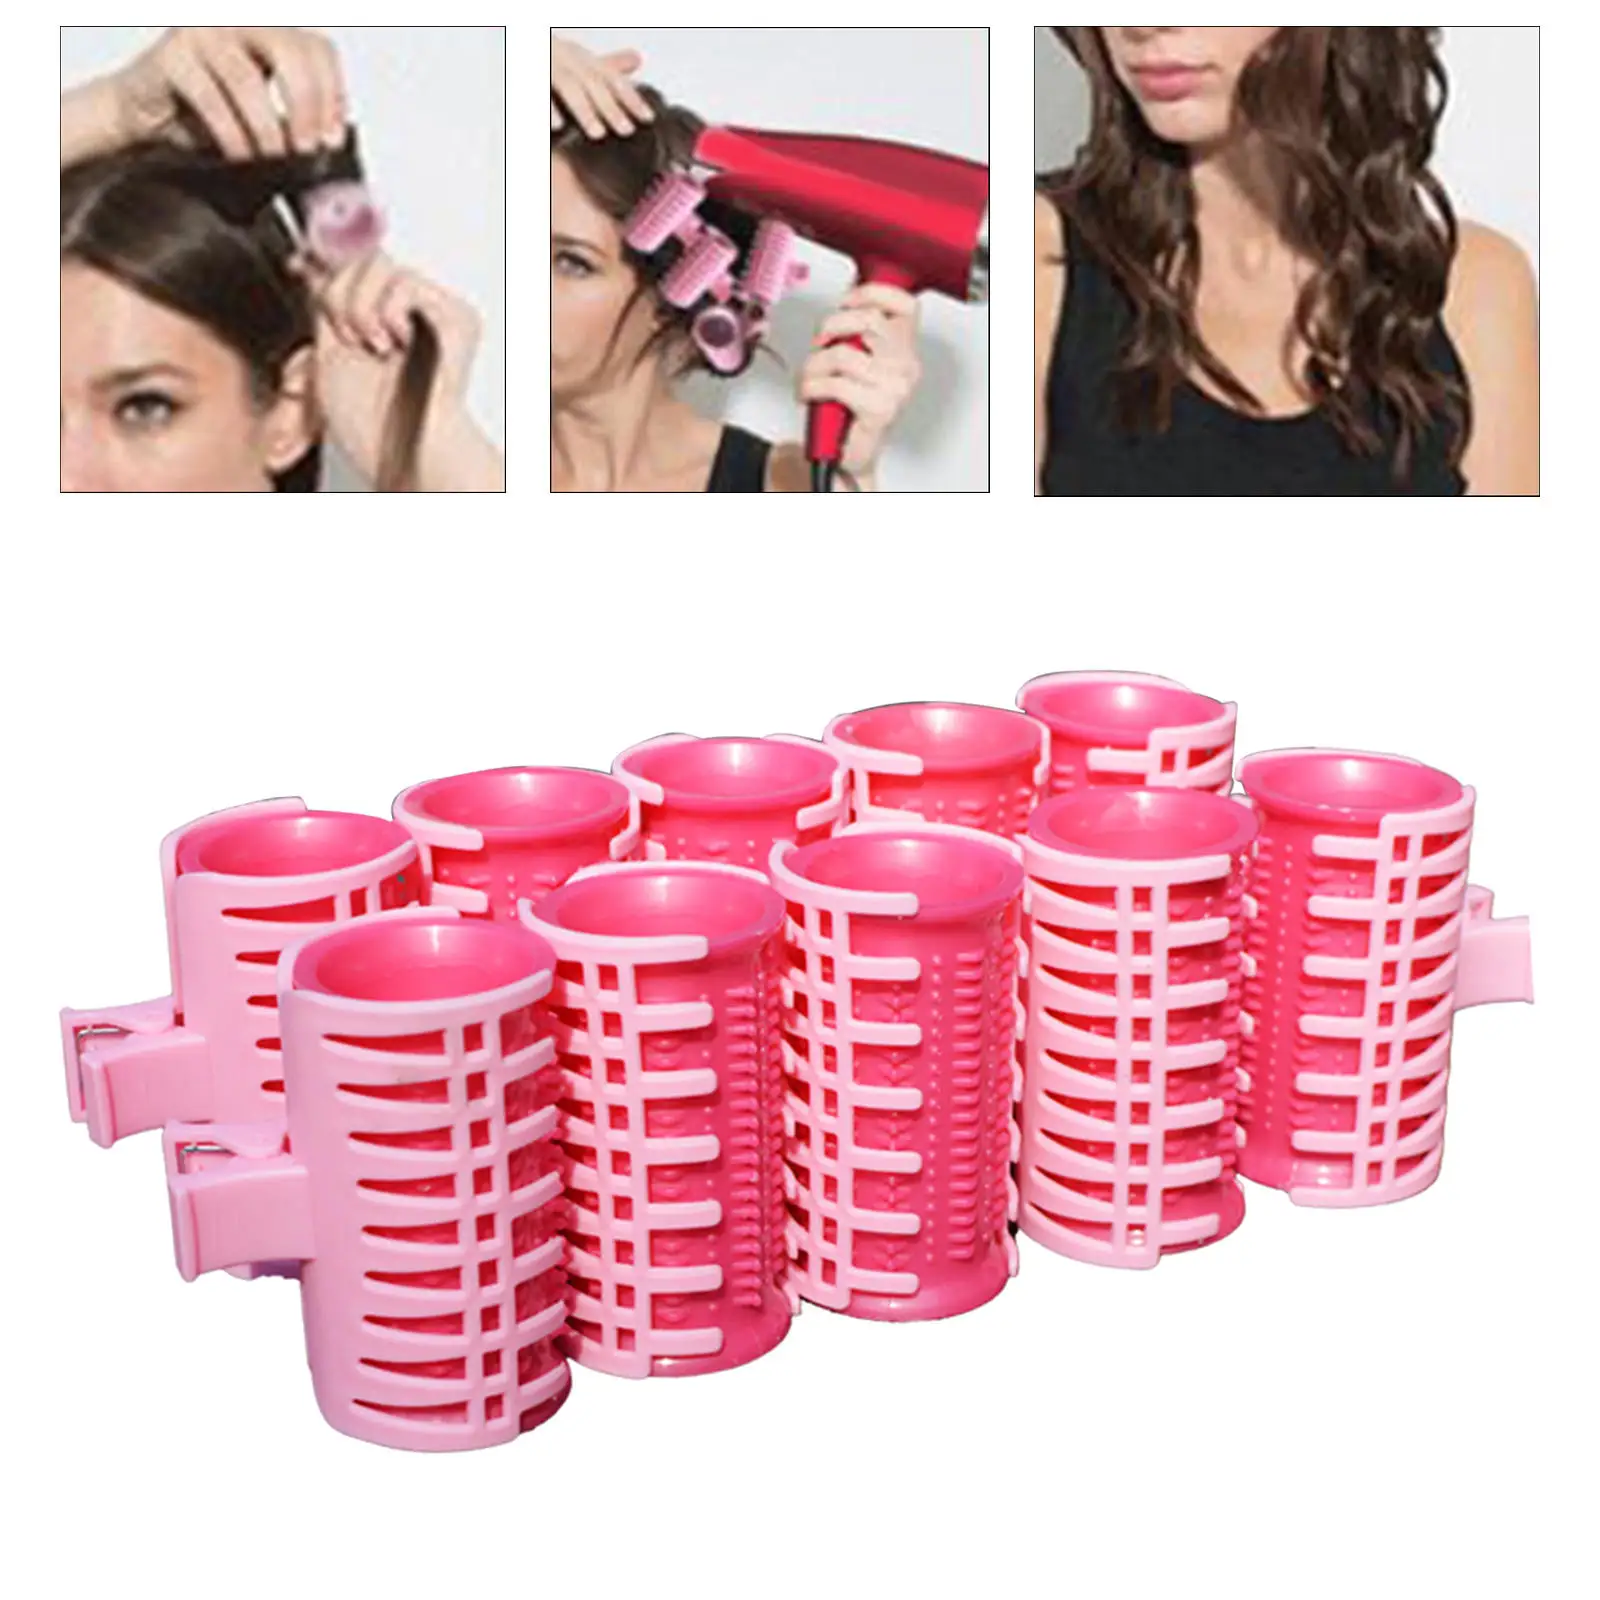 Roller Curlers Air Bangs Self Grip No Heat Candy Color Sticky Cling Set for Girl